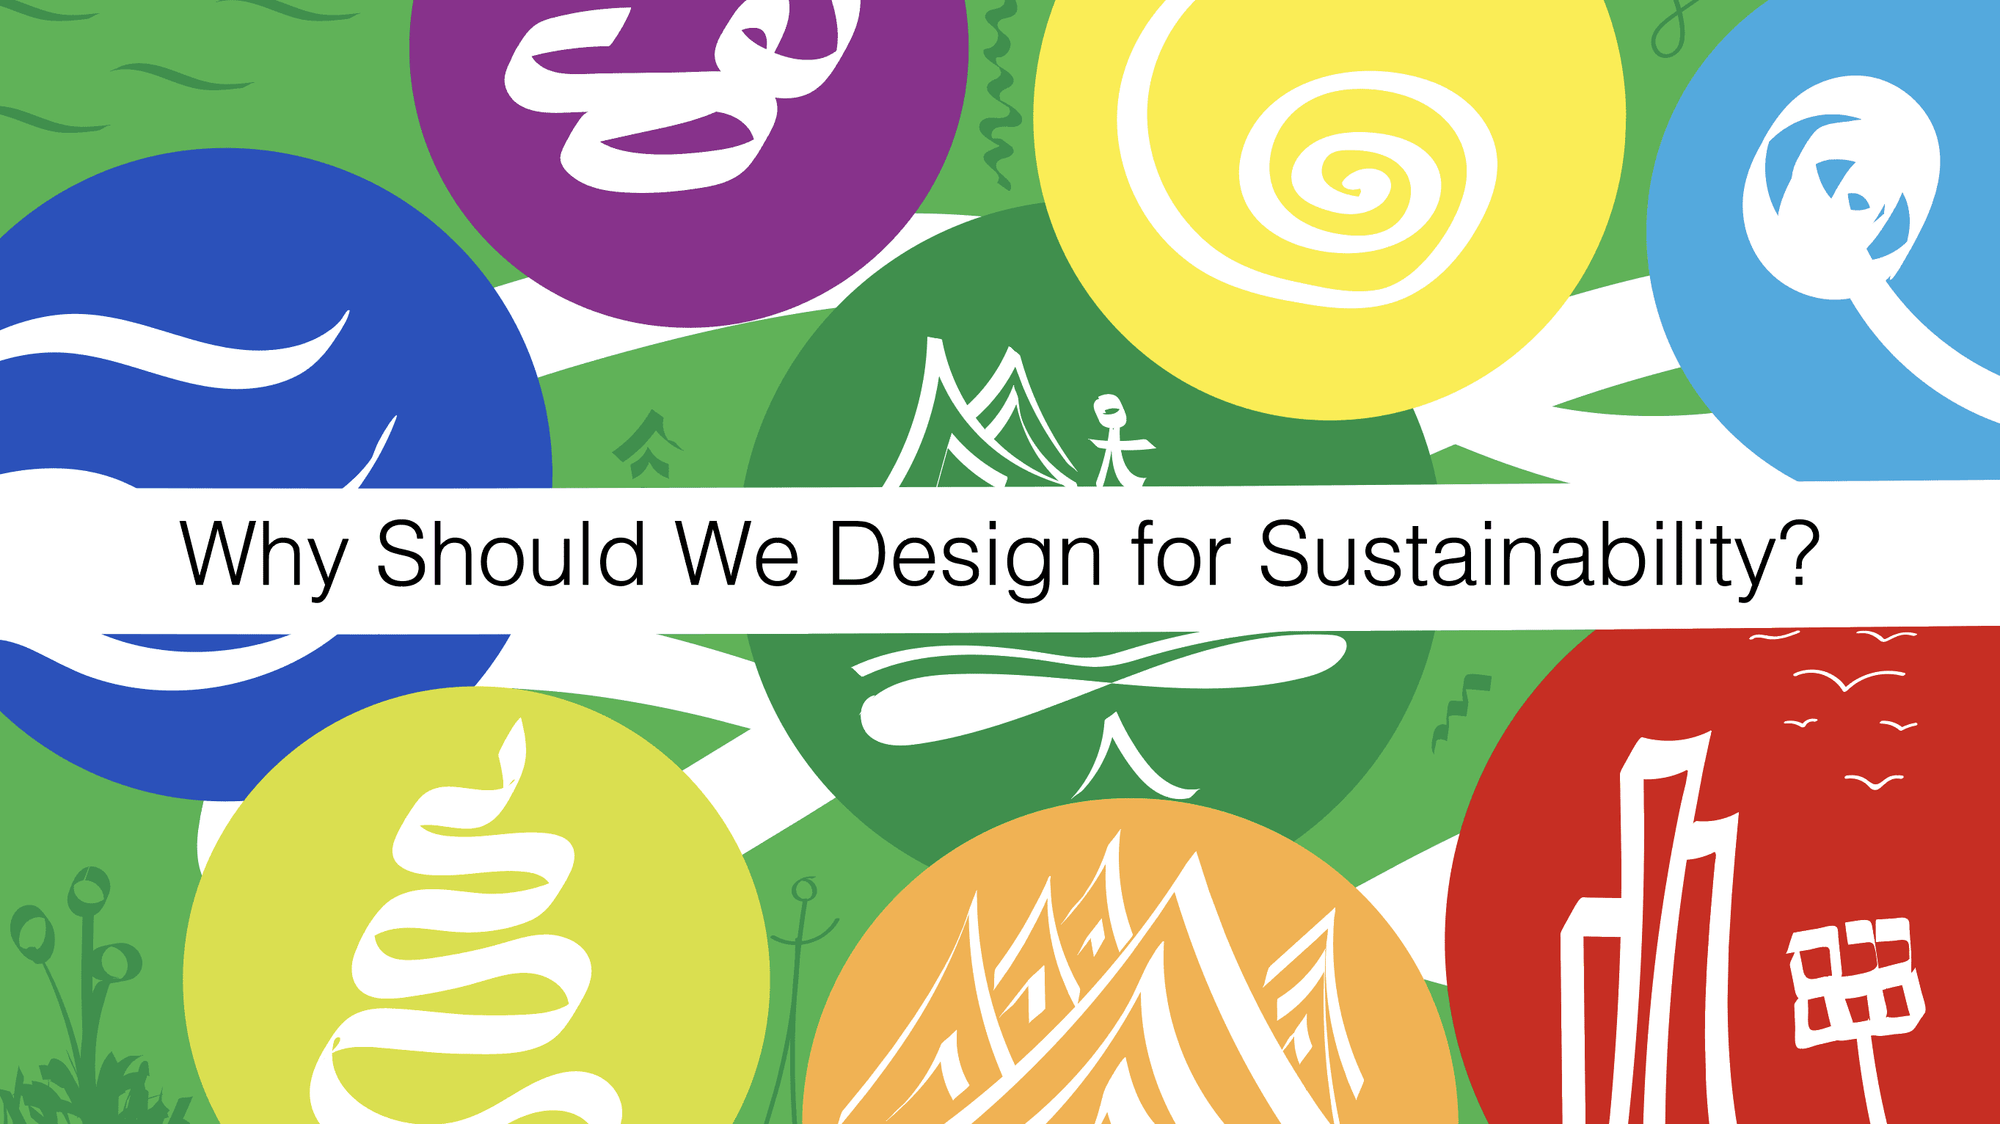 Why Should We Design Products for Sustainability?